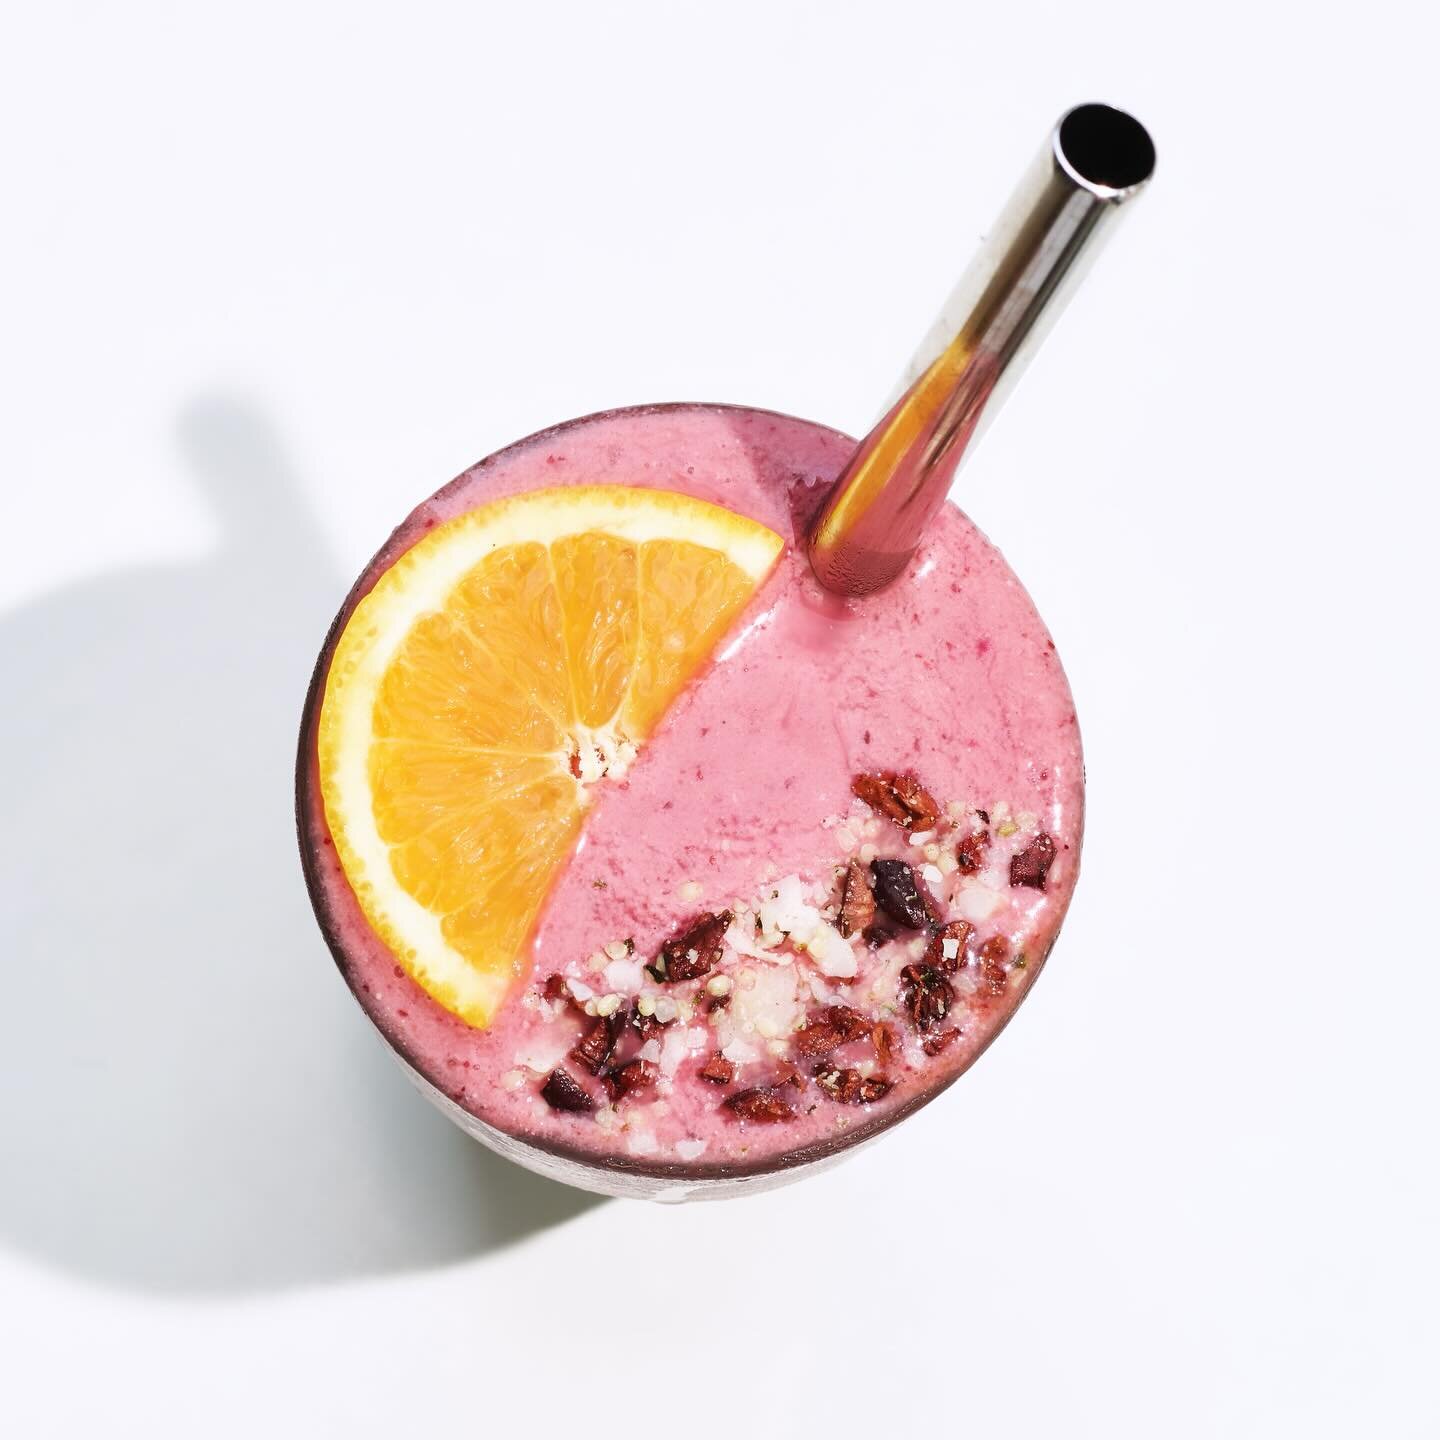 @southernsqueeze smoothie perfection. #foodphotography